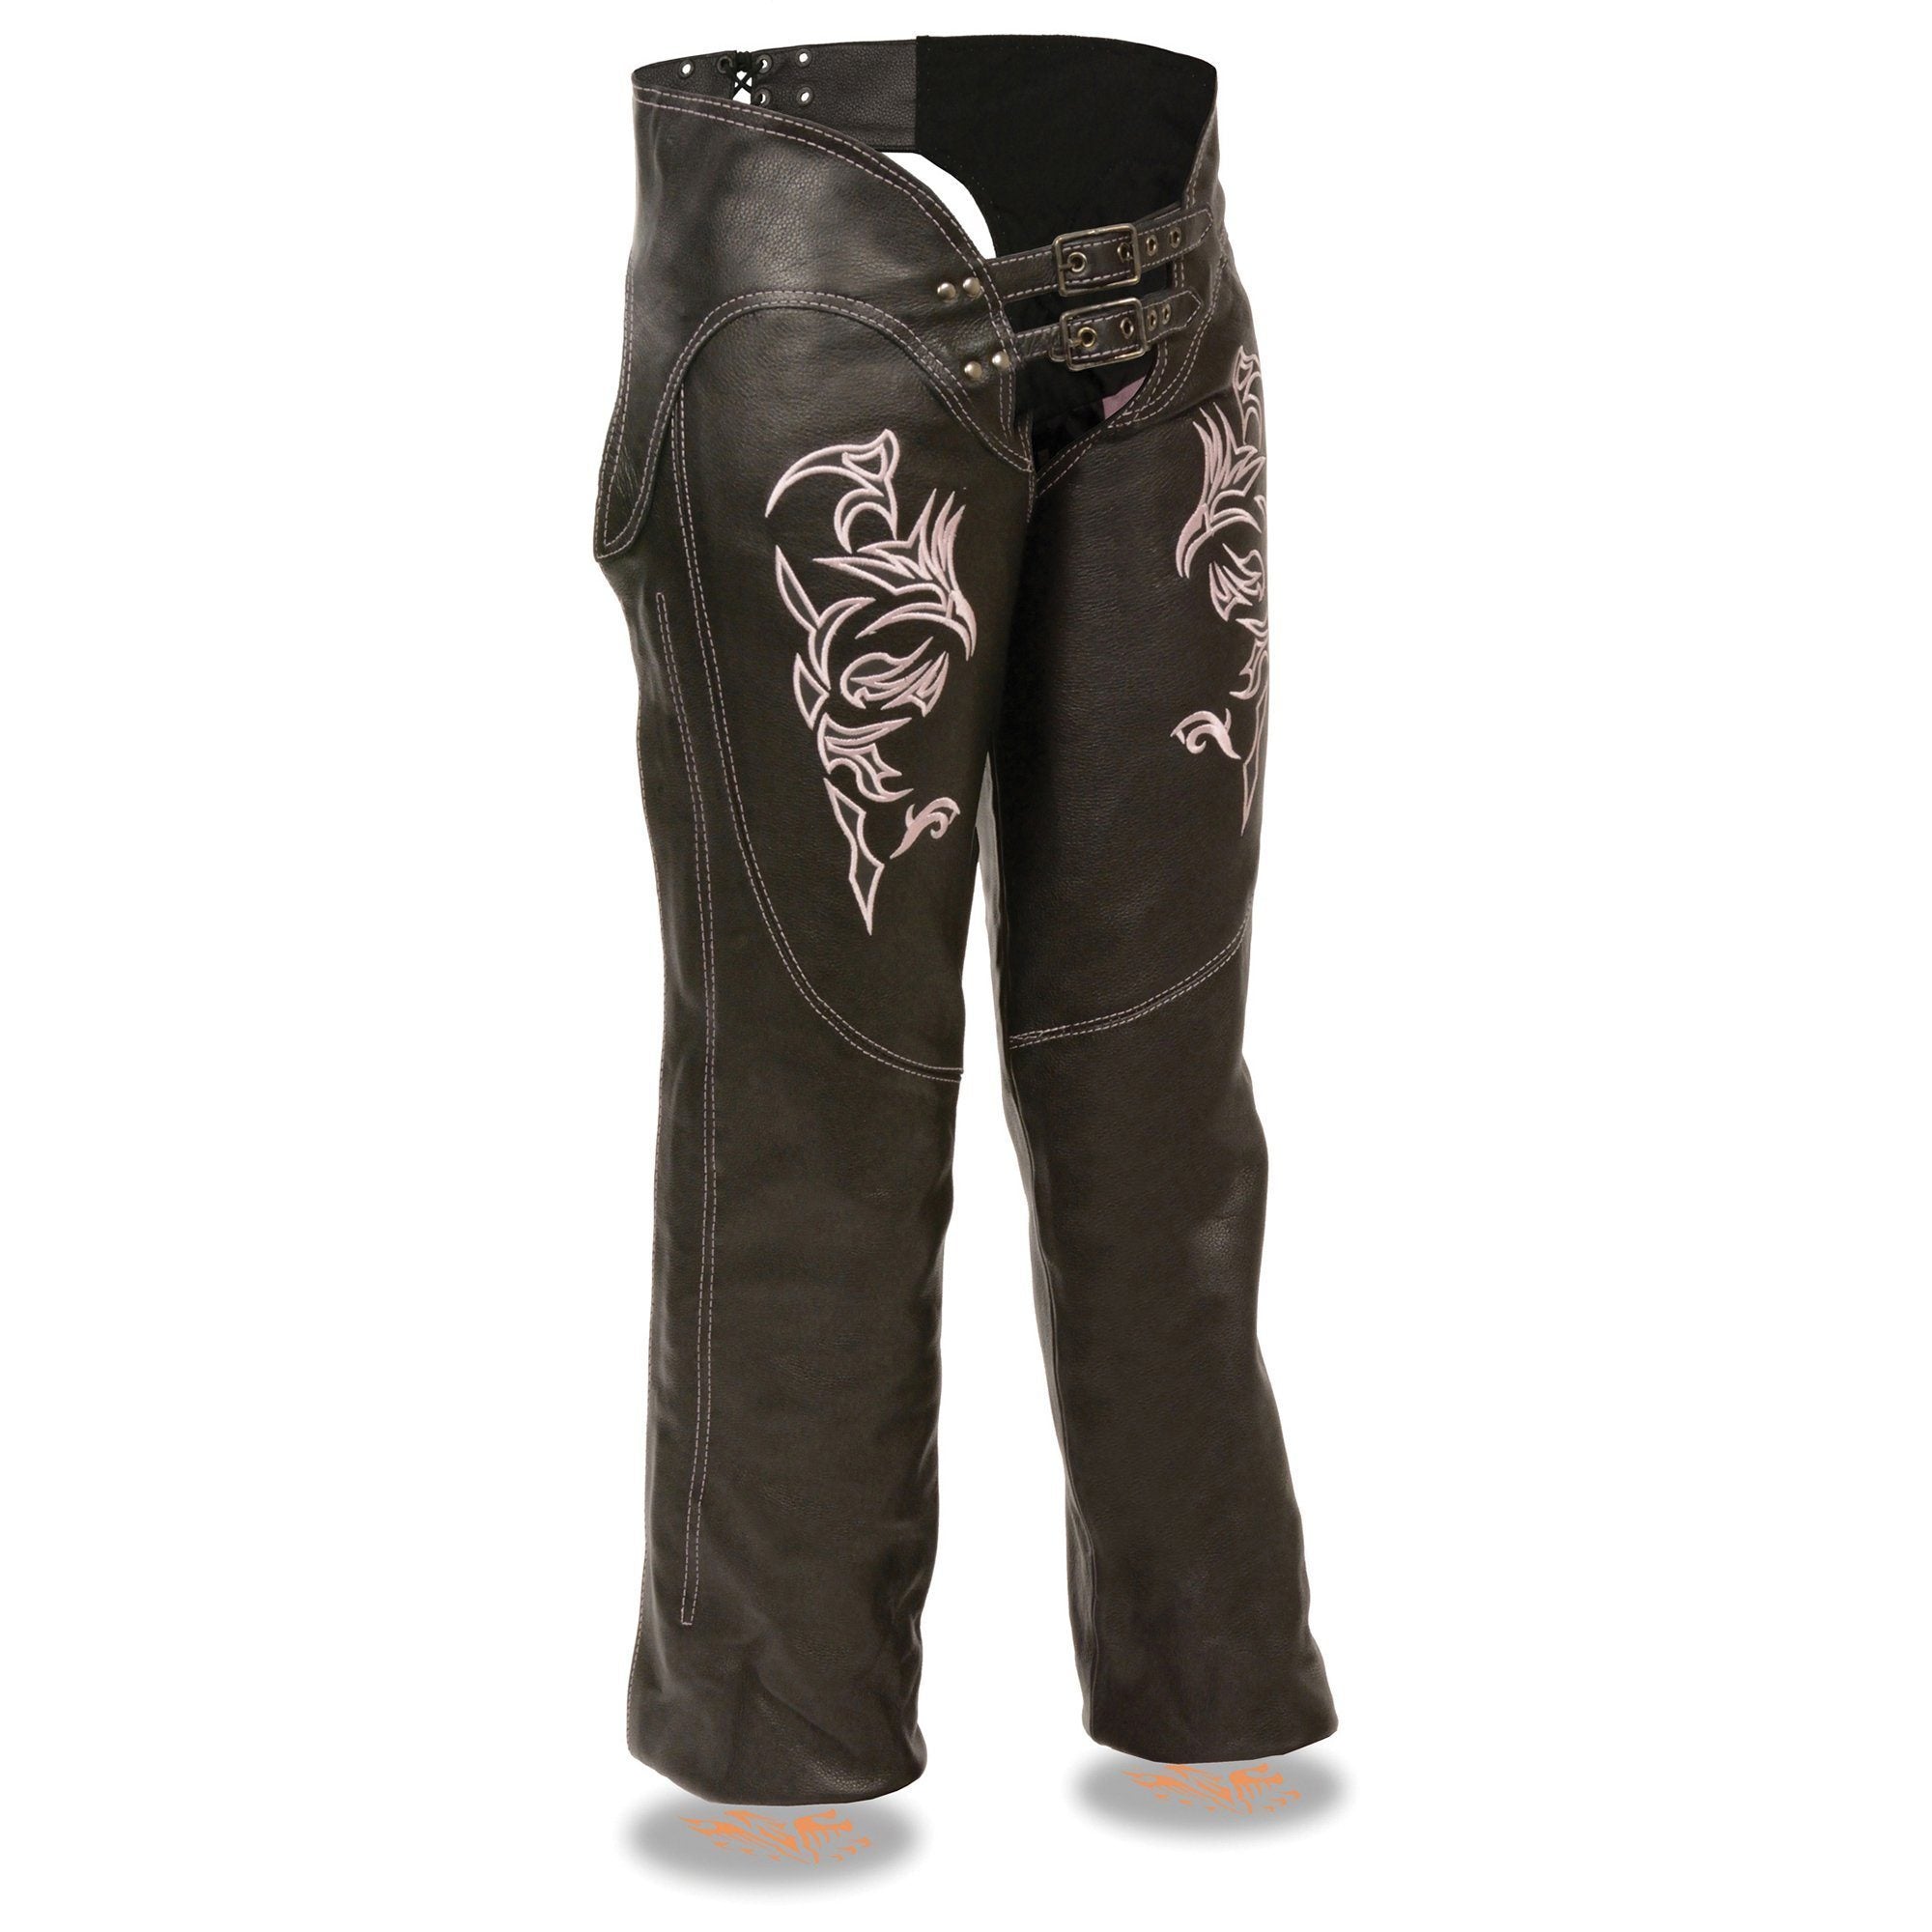 Image of Milwaukee Leather Chaps for Women Black and Pink Low-Rise Waist- Double Buckle Reflective Embroidery Motorcycle Chap- ML1187